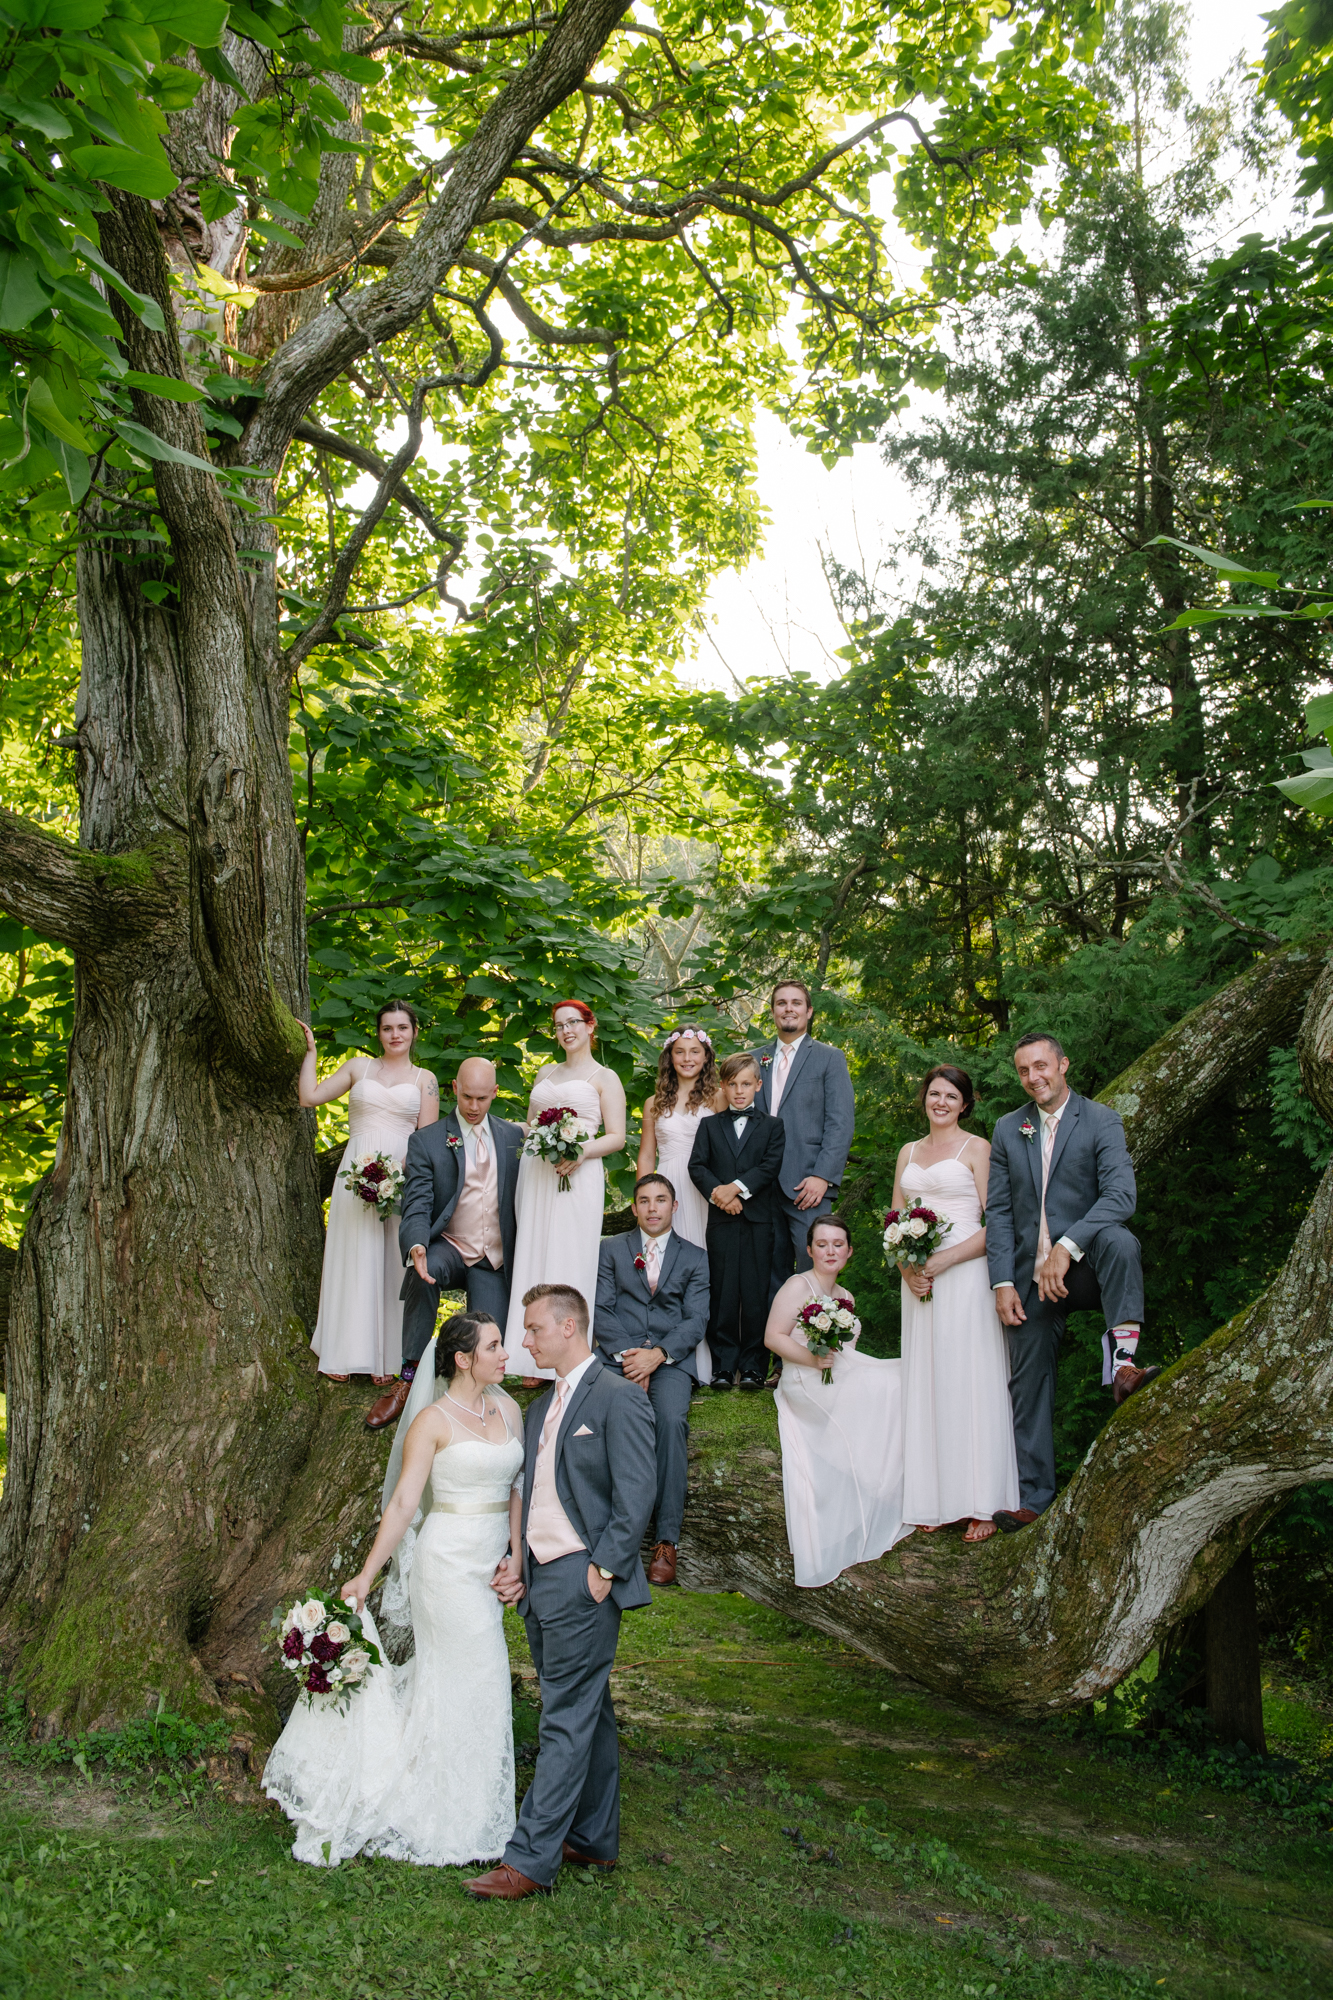 Wedding Party in the Catulpa Tree at the Hilltop Wedding Venue